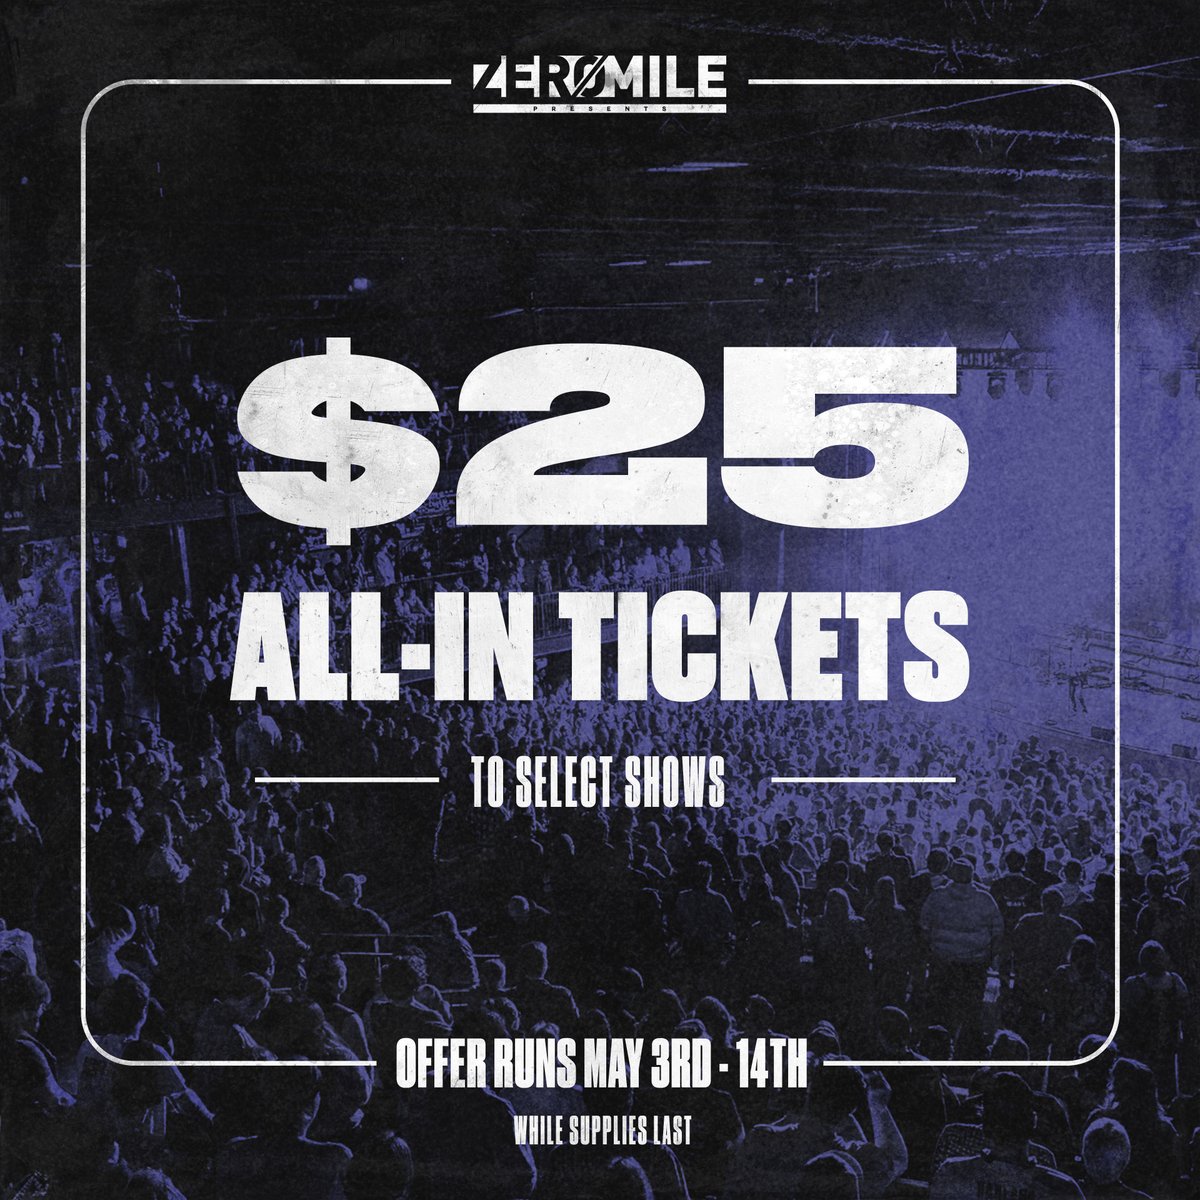 👀 $25 all-in tickets to select shows available this friday at 11am ✅ mark your calendars!